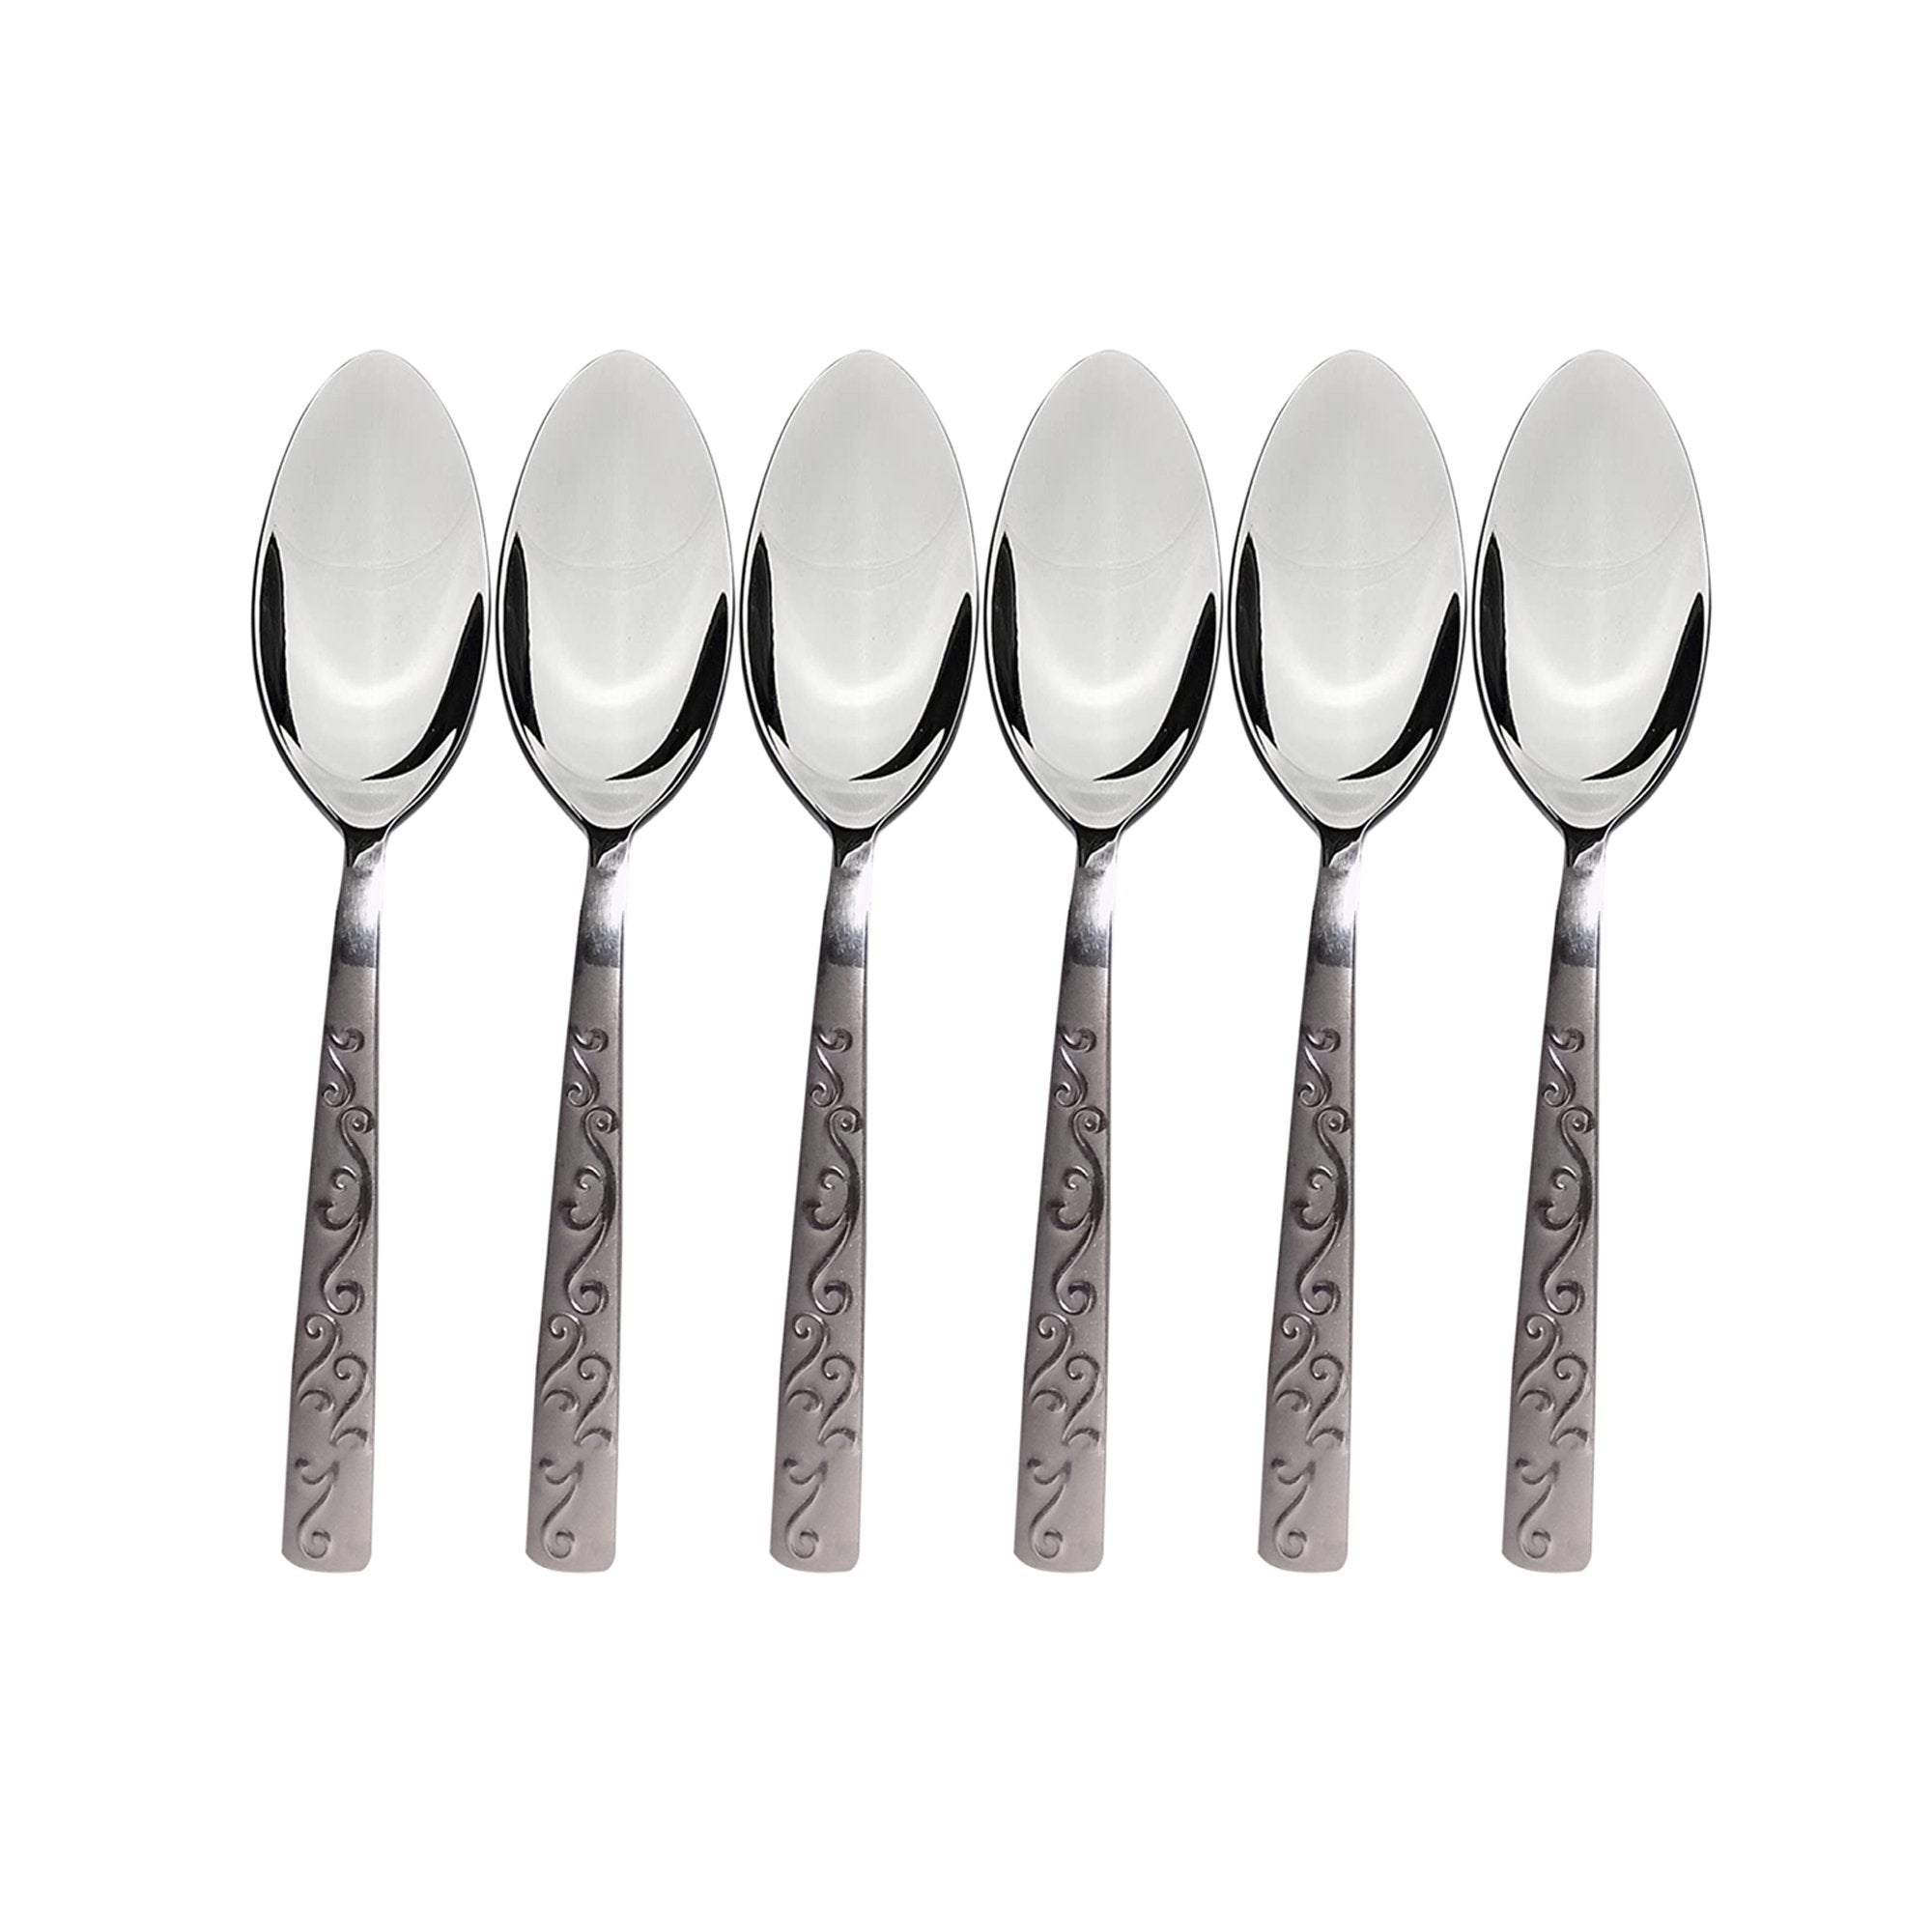 7003 stainless steel small spoon for home kitchen set of 6 pcs